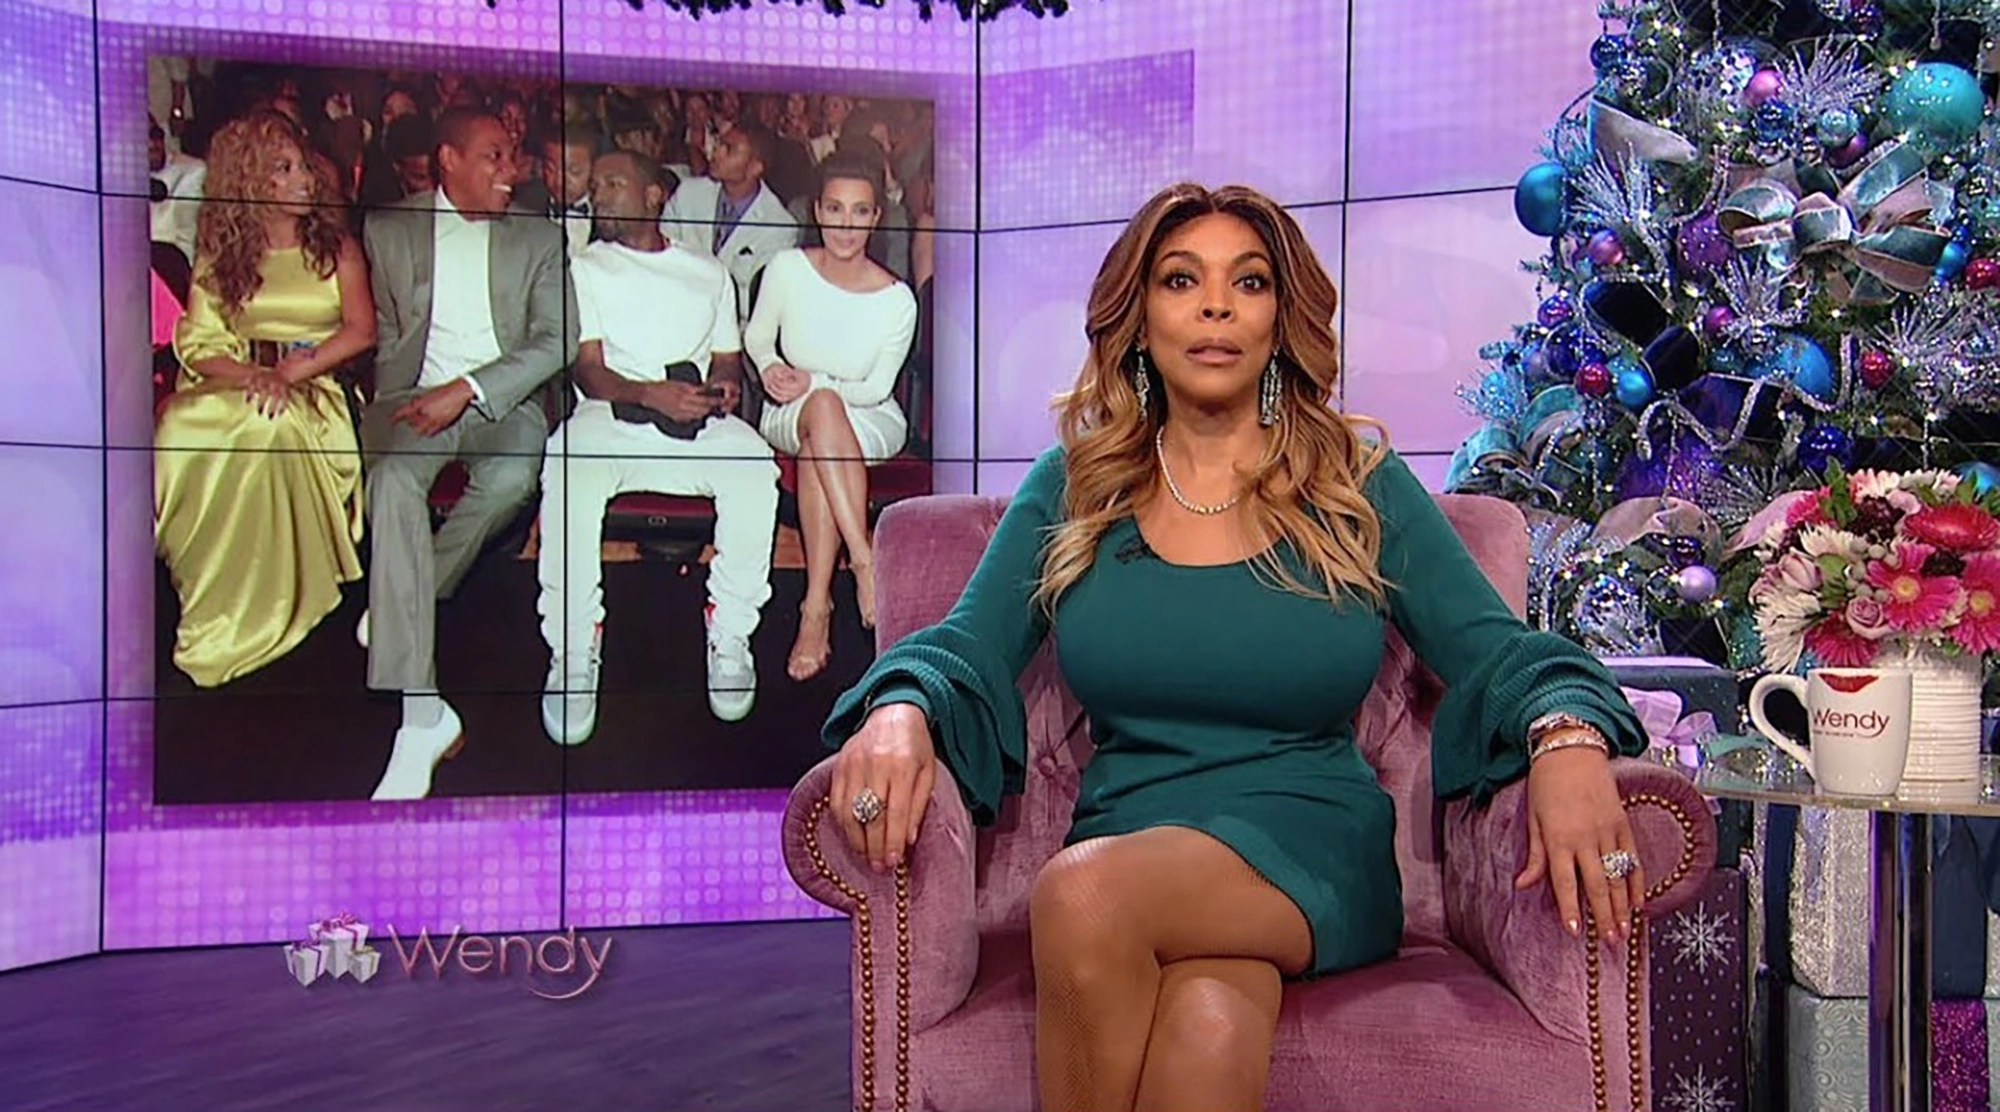 Wendy Williams puts on a VERY cheeky display in a stuffed animal